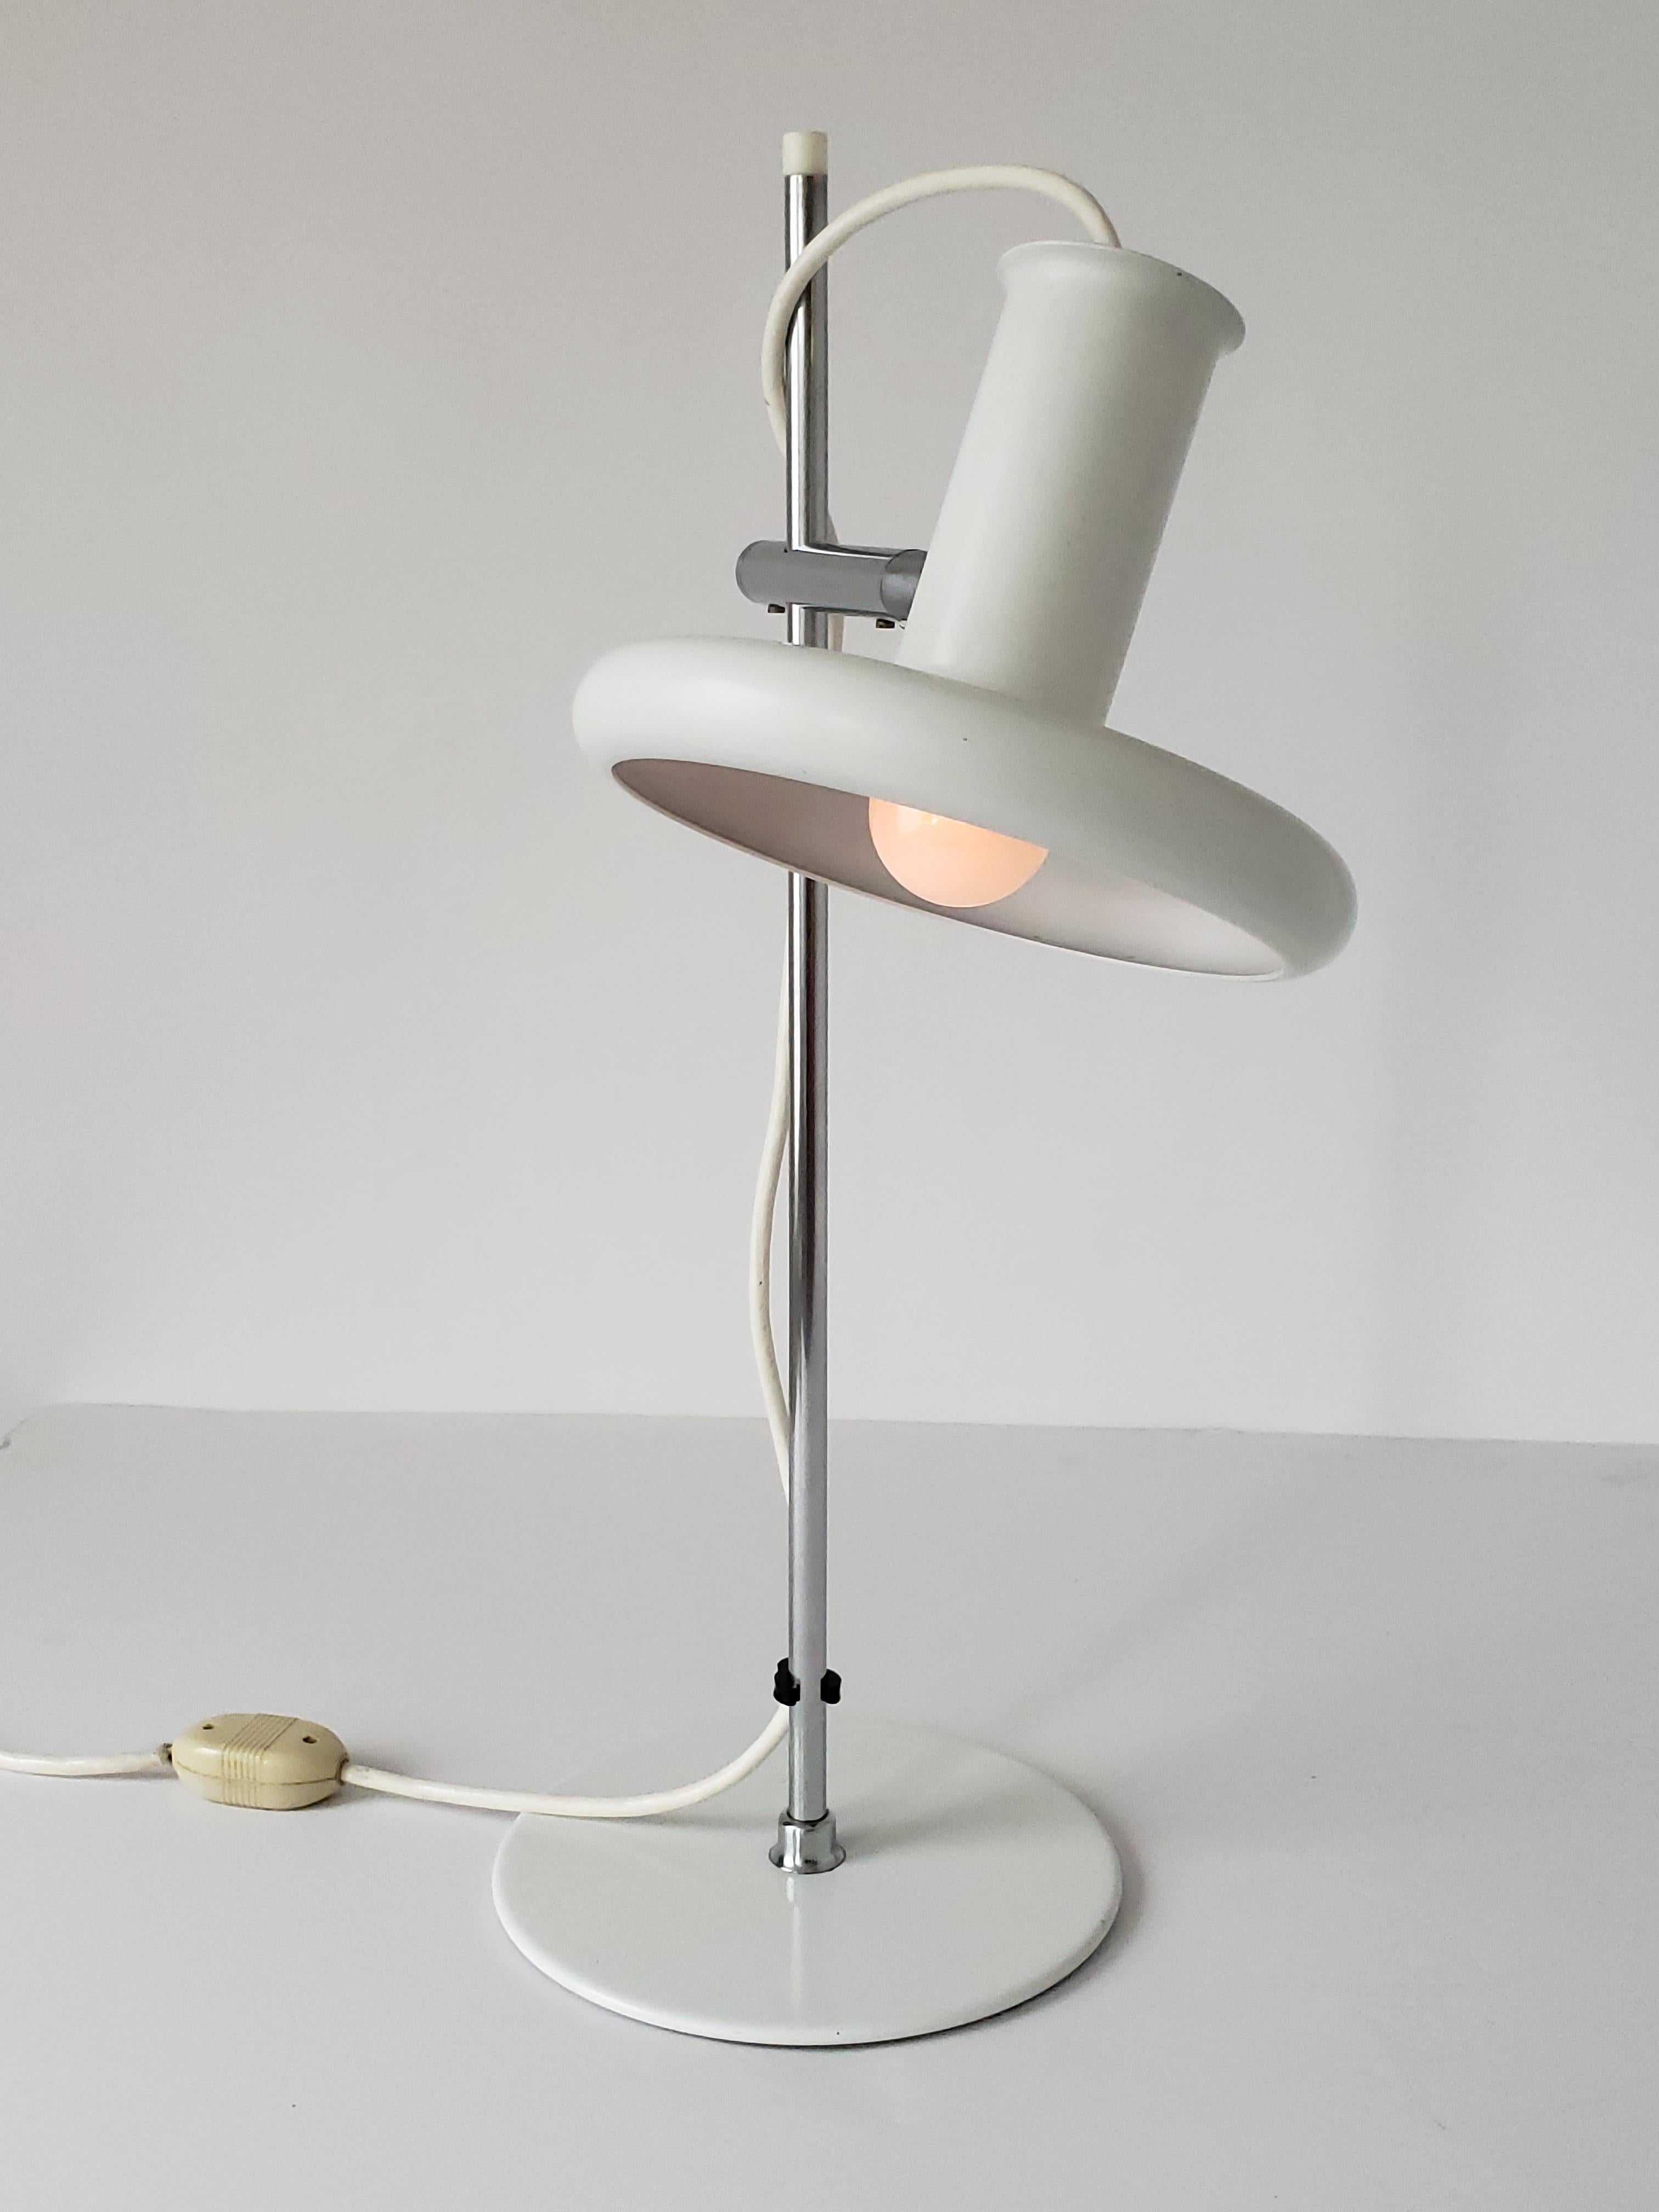 Classic Danish table lamp from Fog & Mørup made of enameled steel and chrome.

Shade is fully ajustable in all direction and slide up and down on pole.

Well made solid structure and mechanism.

Contain one E26 size socket rated at 60